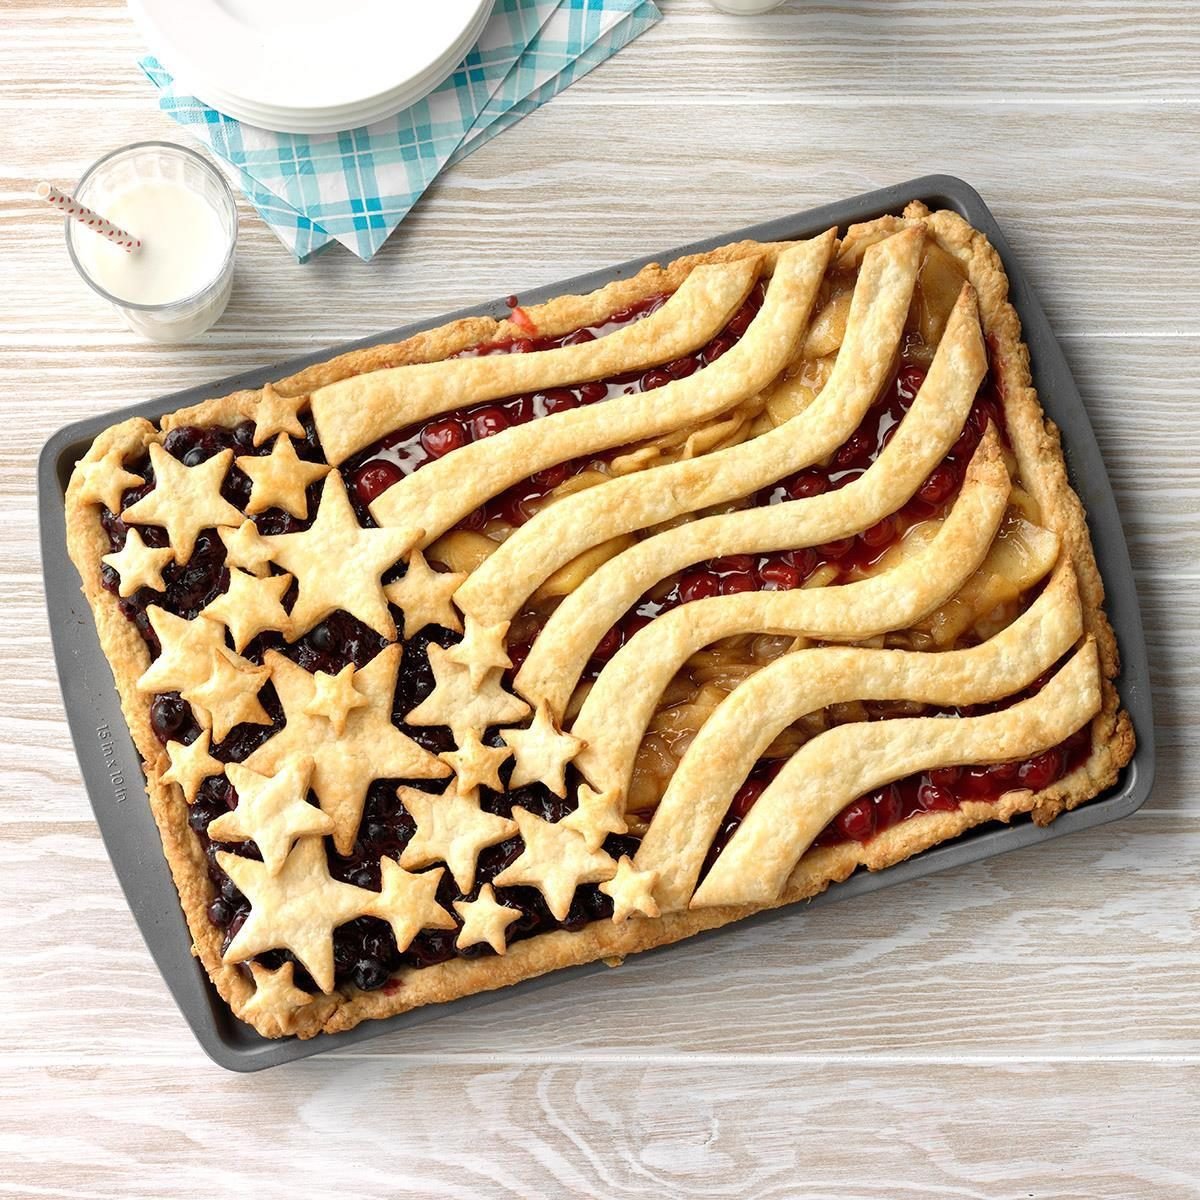 Celebrate the Fourth of July with These Recipes for a Crowd